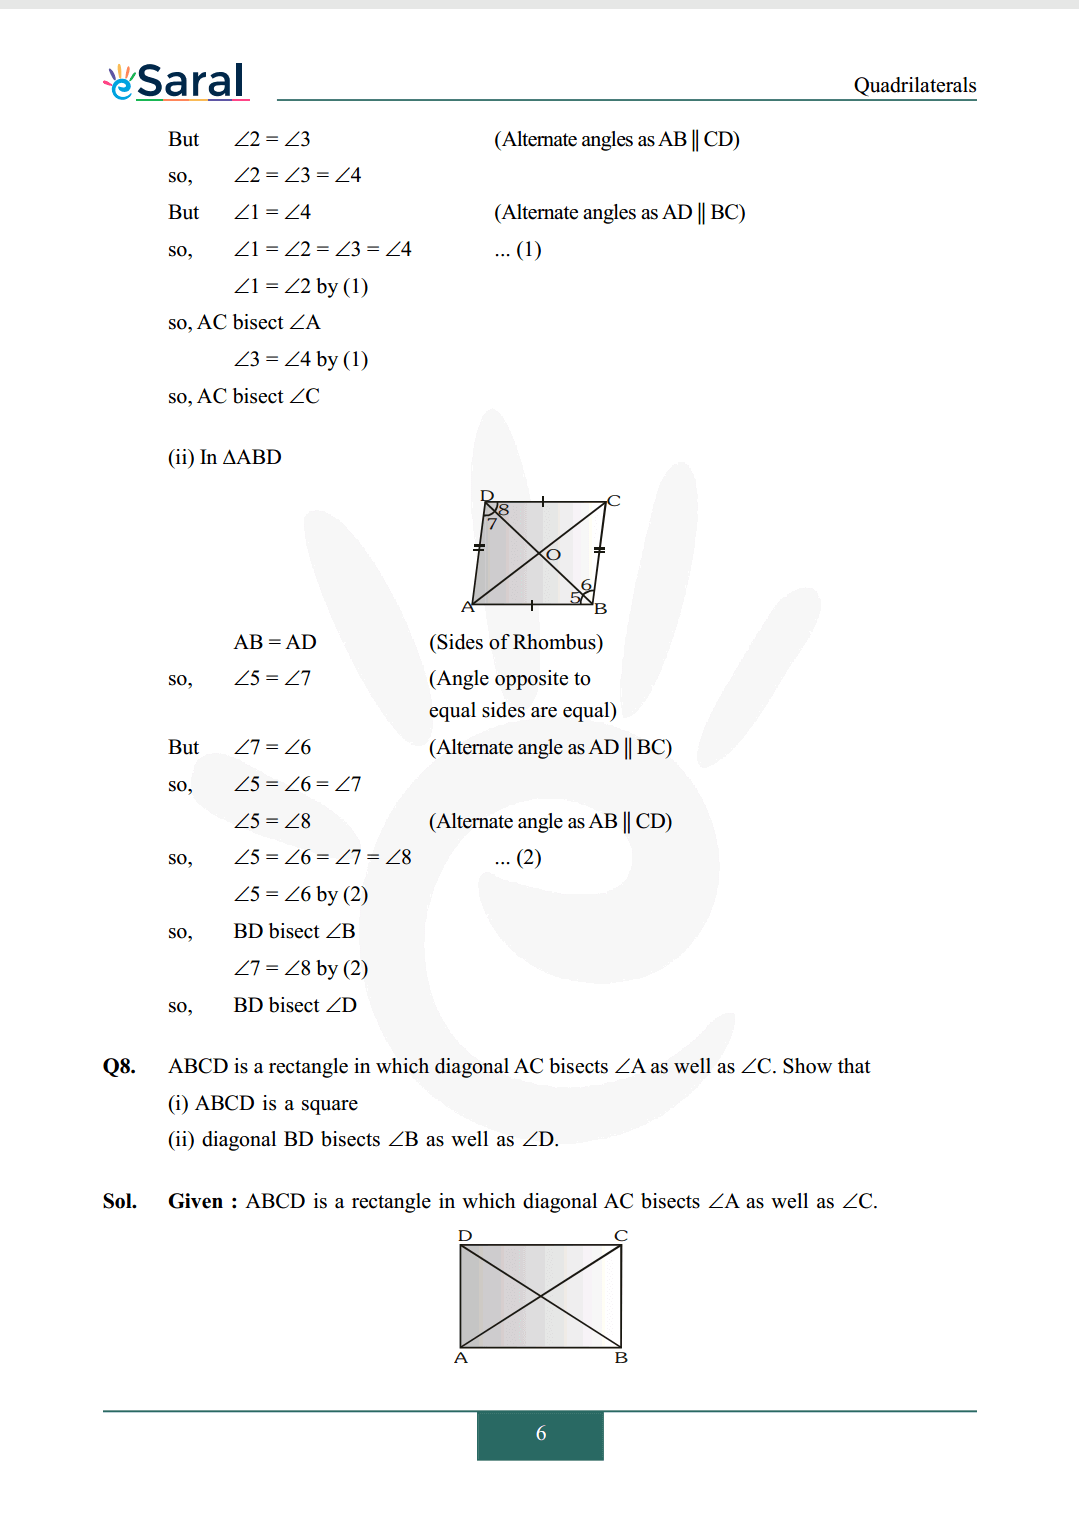 Class 9 maths chapter 8 exercise 8.1 solutions Image 6